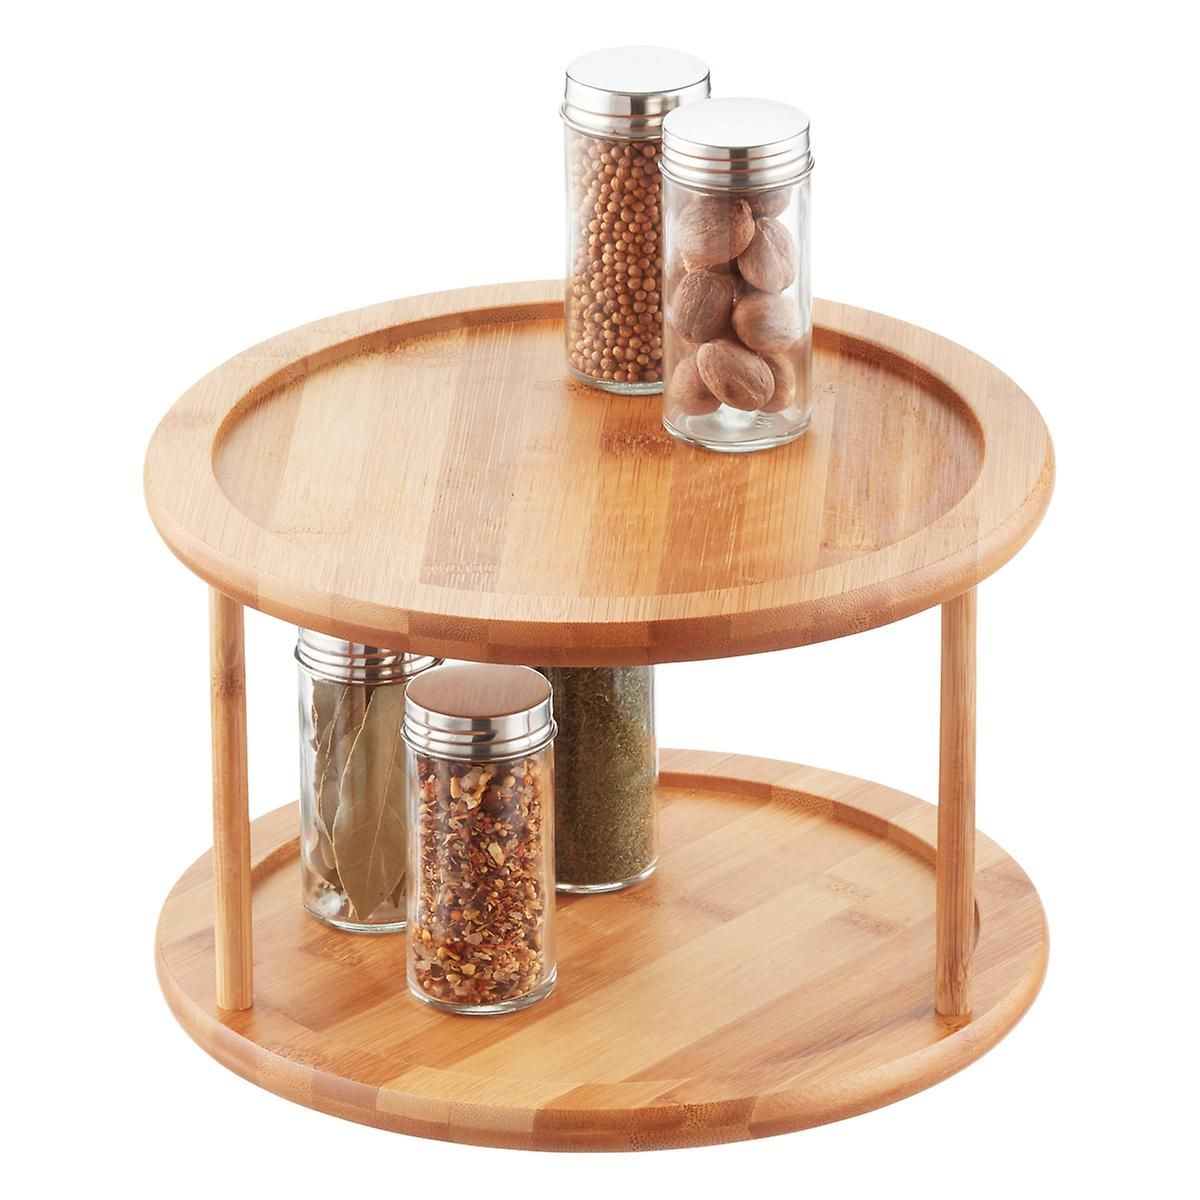 2-Tier Bamboo Lazy Susan | The Container Store